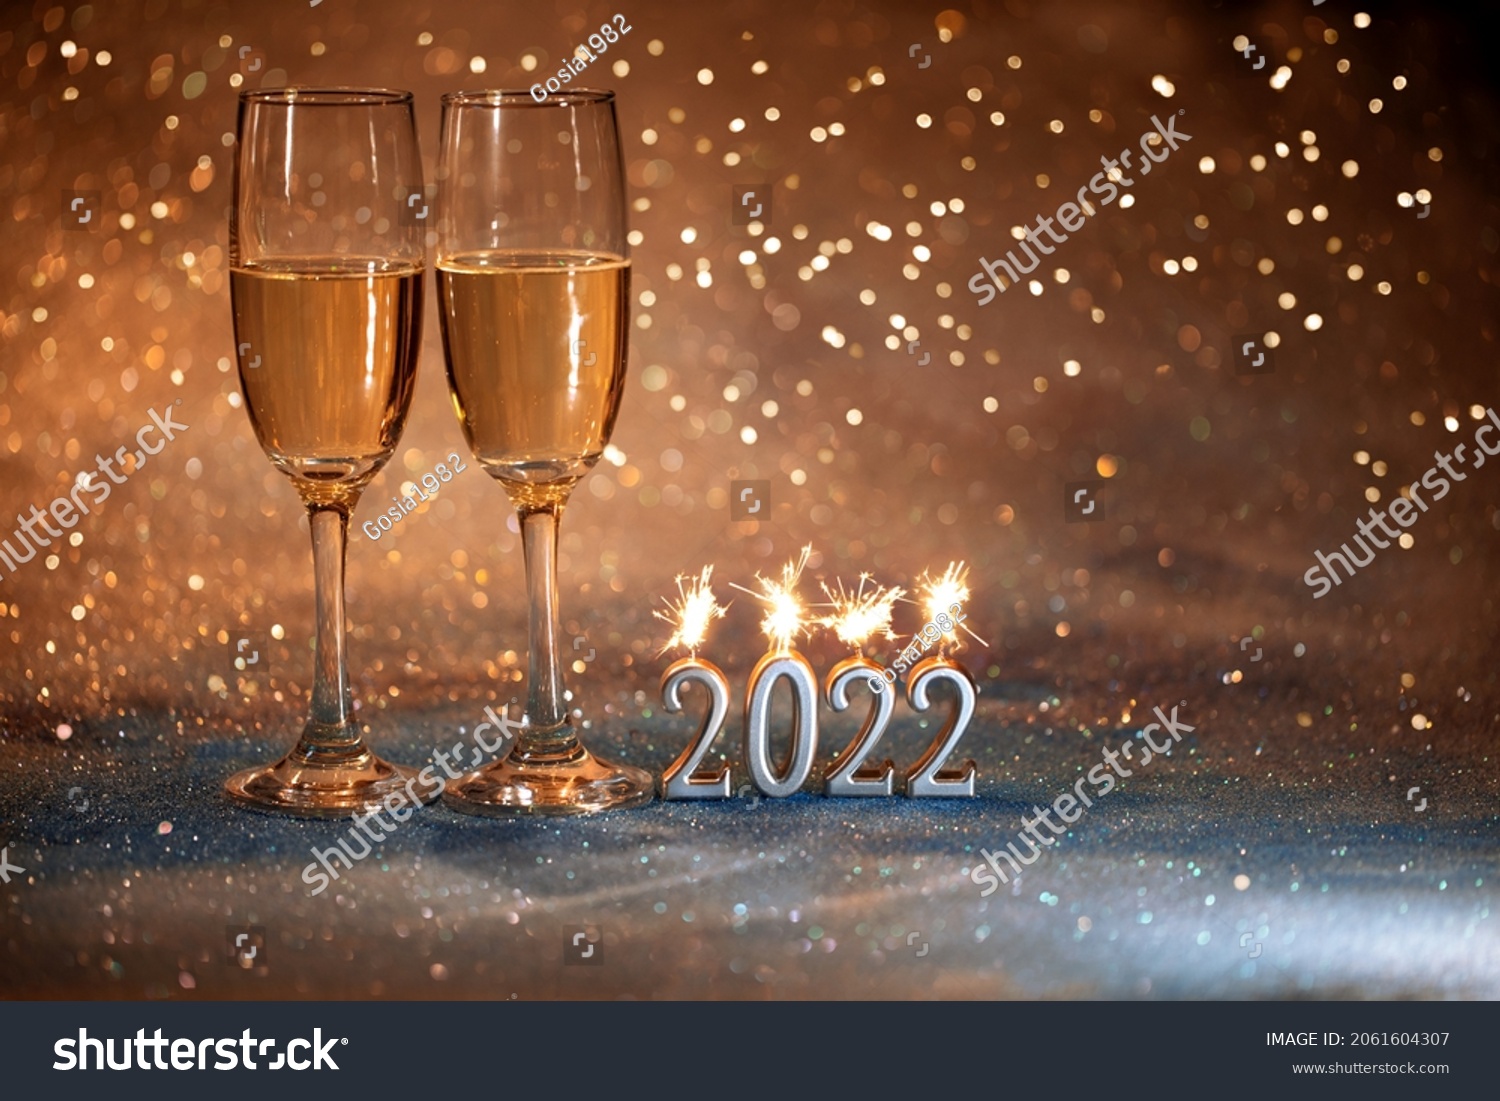 2022 New Year. Happy new year 2022 greeting card. Champagne glasses on glitter background #2061604307